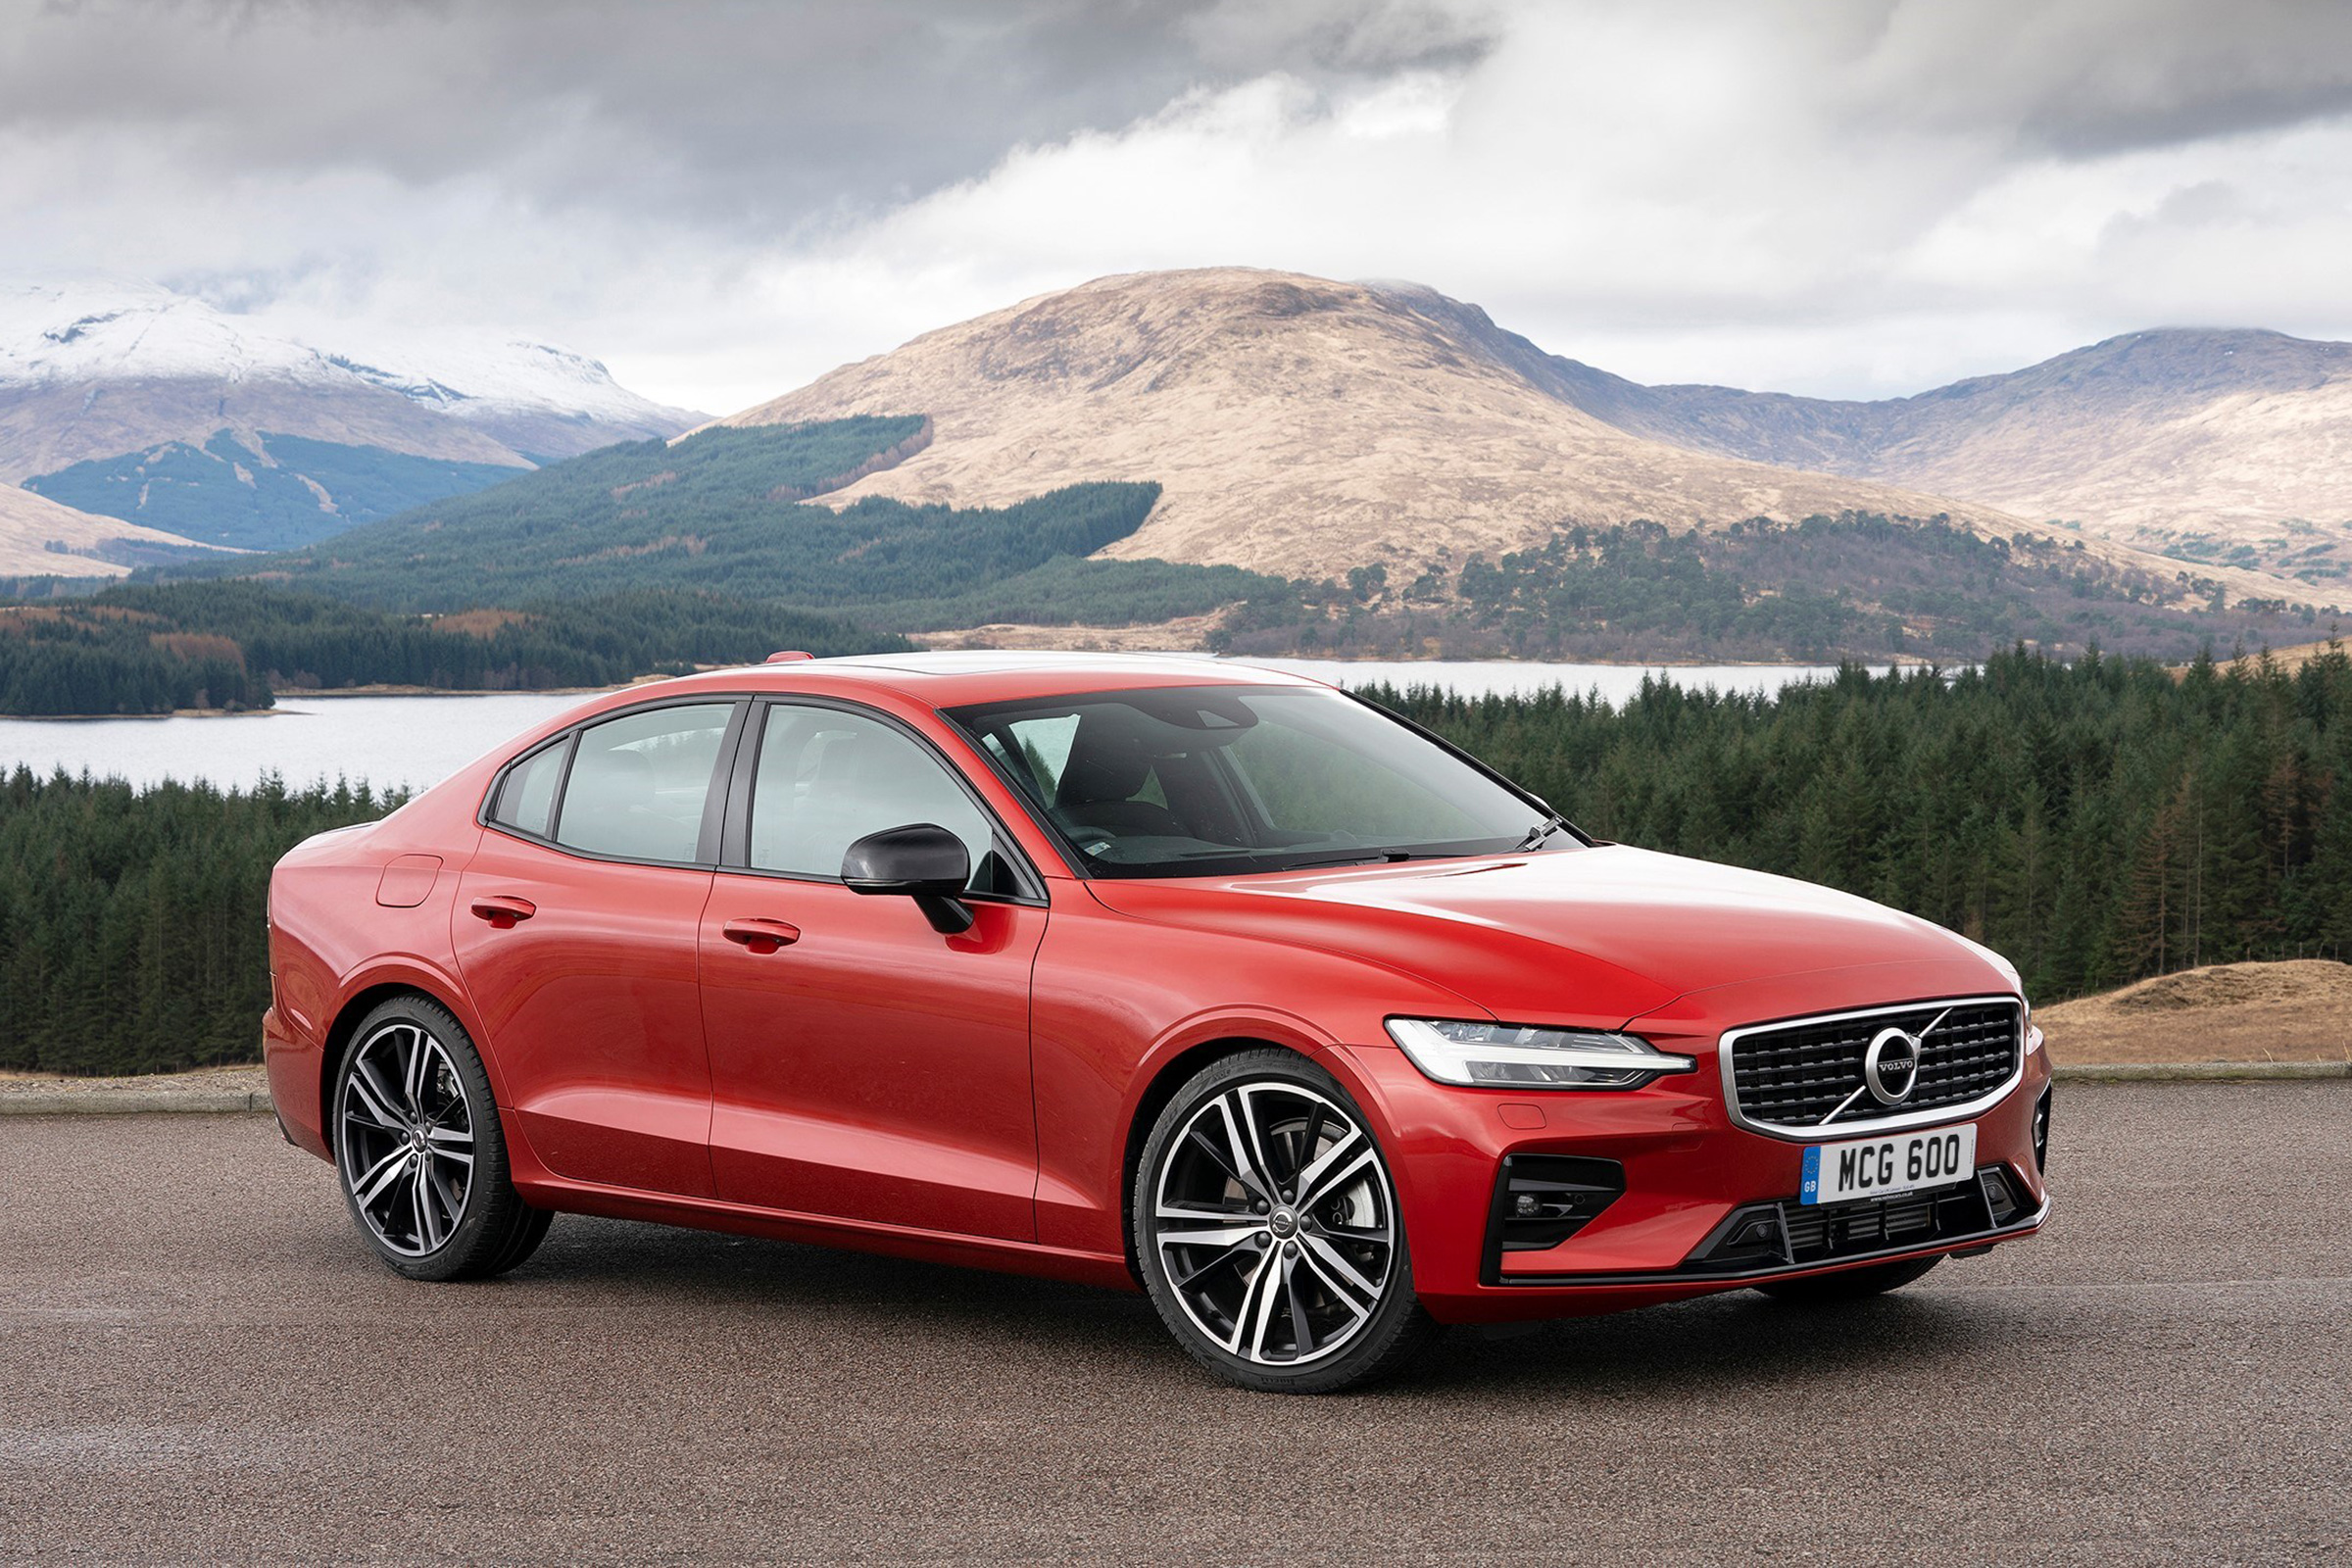 Volvo S60 T8 Twin Engine plug-in hybrid: prices and specs announced |  DrivingElectric